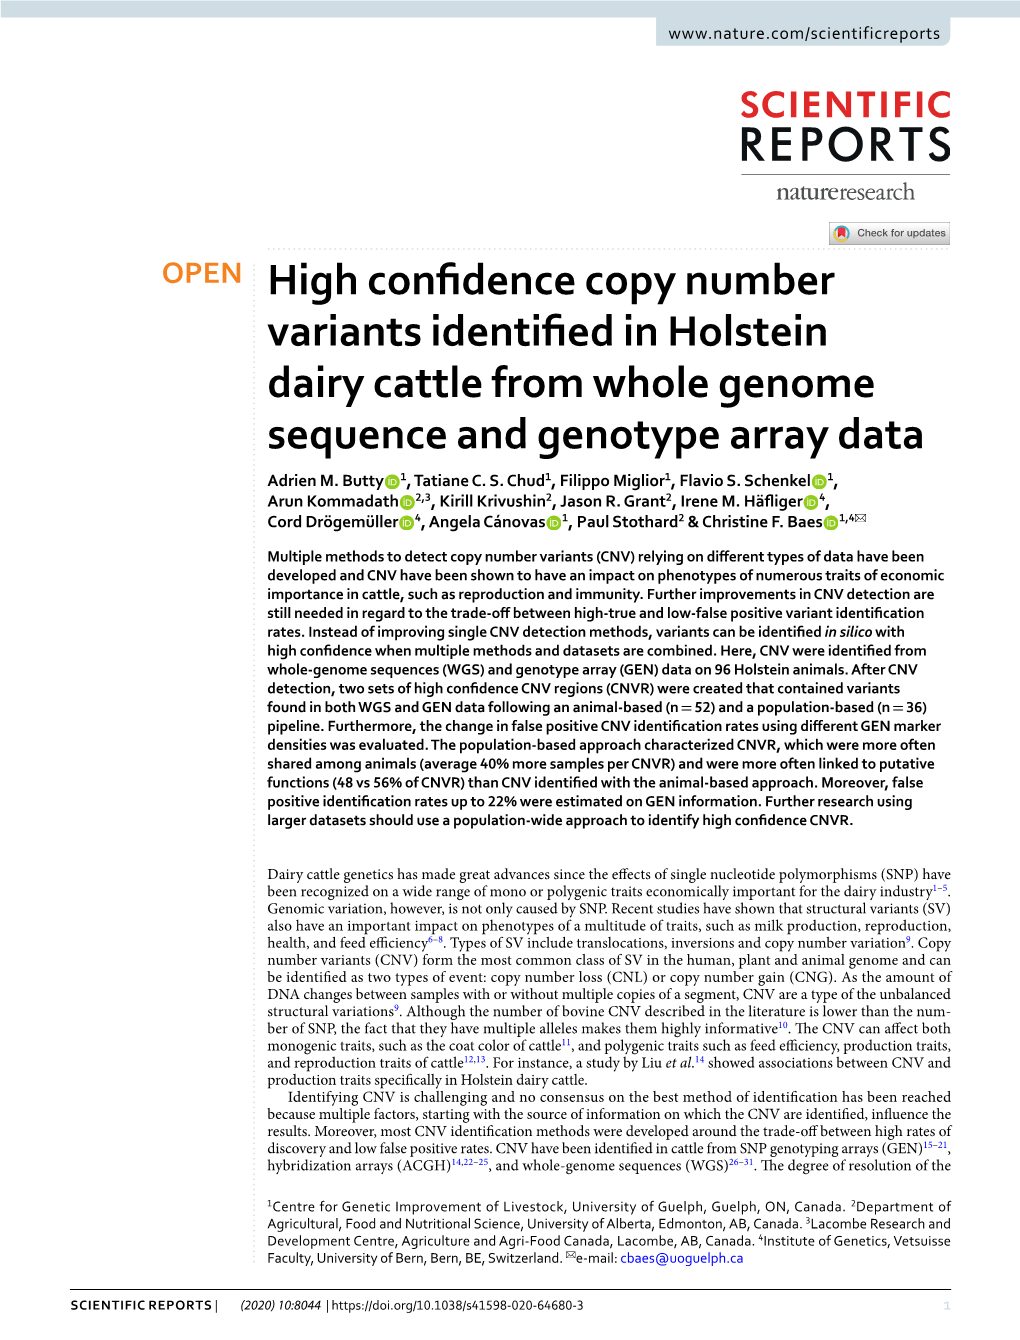 High Confidence Copy Number Variants Identified in Holstein Dairy Cattle